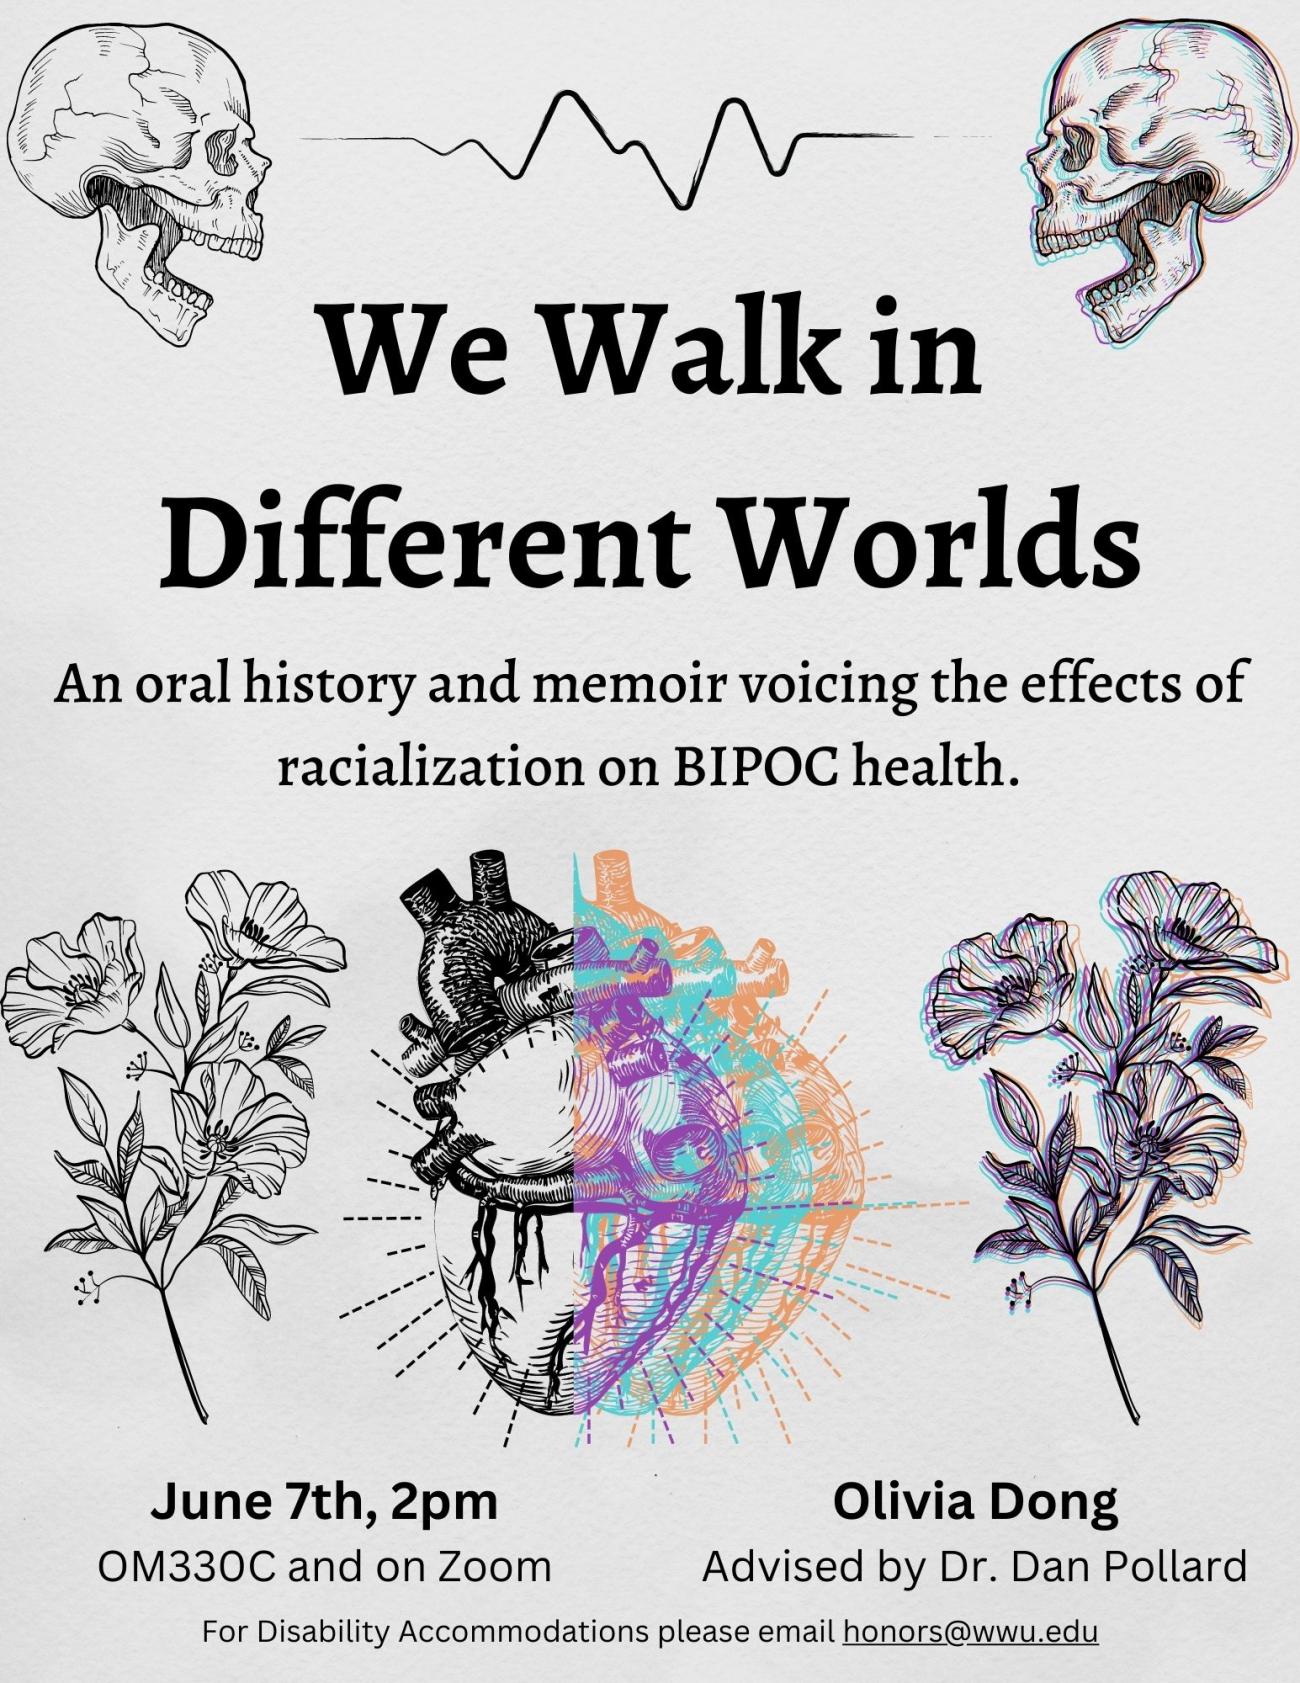 A light grey poster with two drawings of human skulls with a heart monitor line between them, two drawings of flowers on the left and the right, and an anatomical heart drawing in between them. Drawings on the right side of the poster has a colorful effect. Text reads: "We Walk in Different Worlds, An Oral History and Memoir Voicing the Effects of Racialization on BIPOC Health. June 7th 2pm OM330C and on zoom. Olivia Dong Advised by Dr. Dan Pollard for disability accommodations please email honors@wwu.edu."